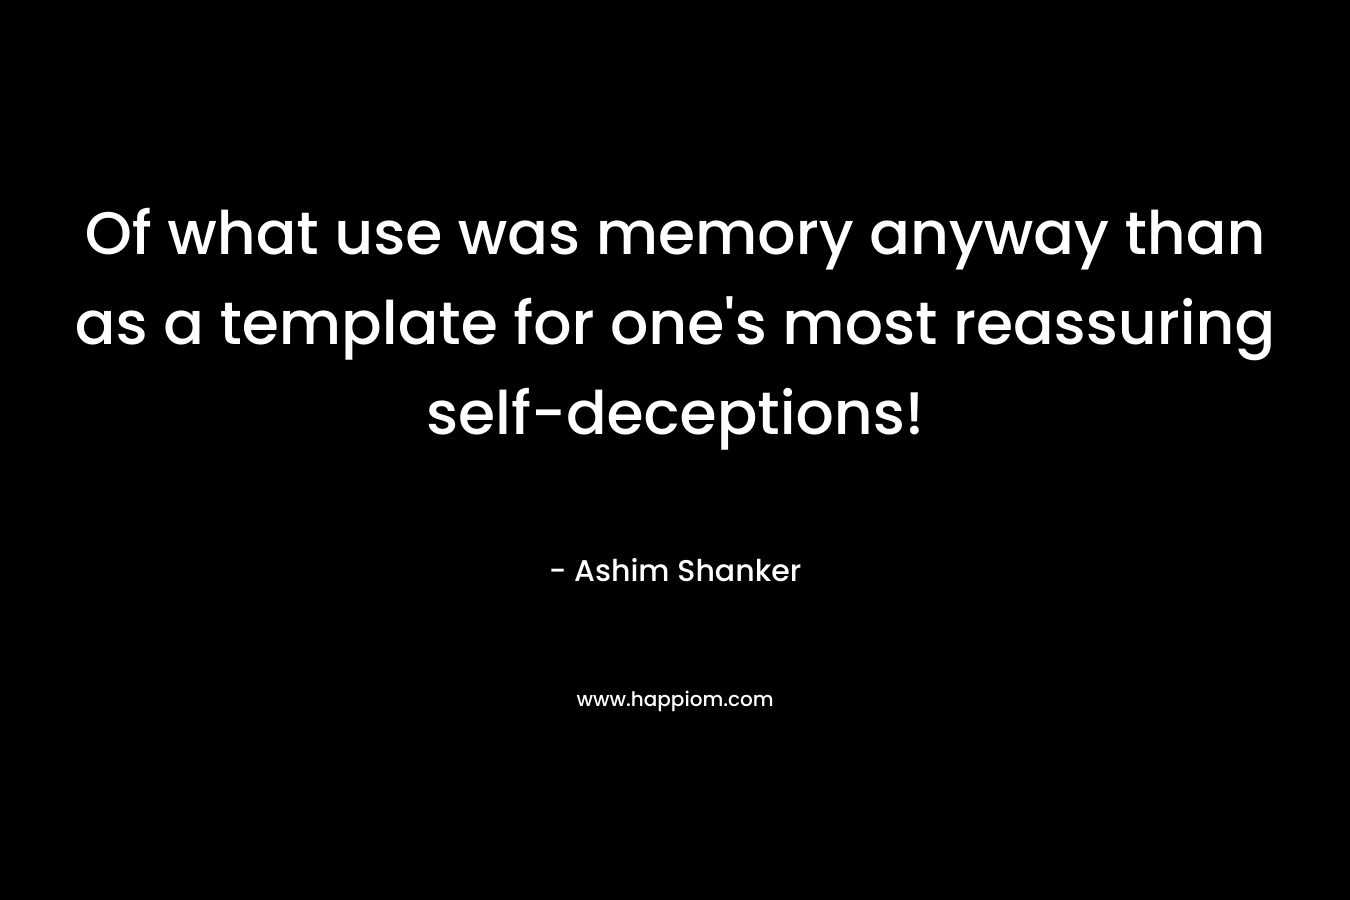 Of what use was memory anyway than as a template for one's most reassuring self-deceptions!